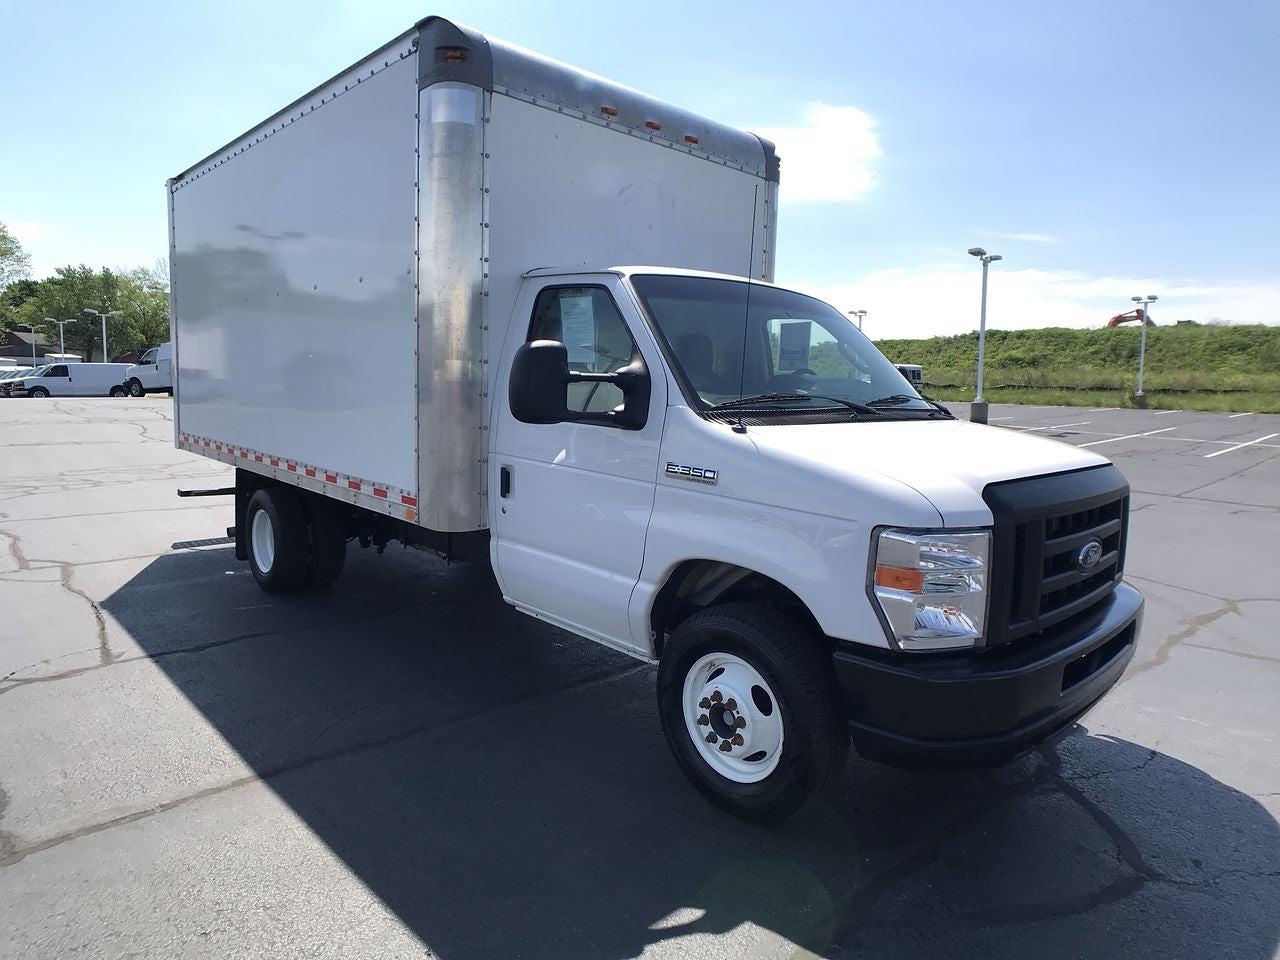 Used 19 Ford E 350 Cutaway Van For Sale In Merrillville In